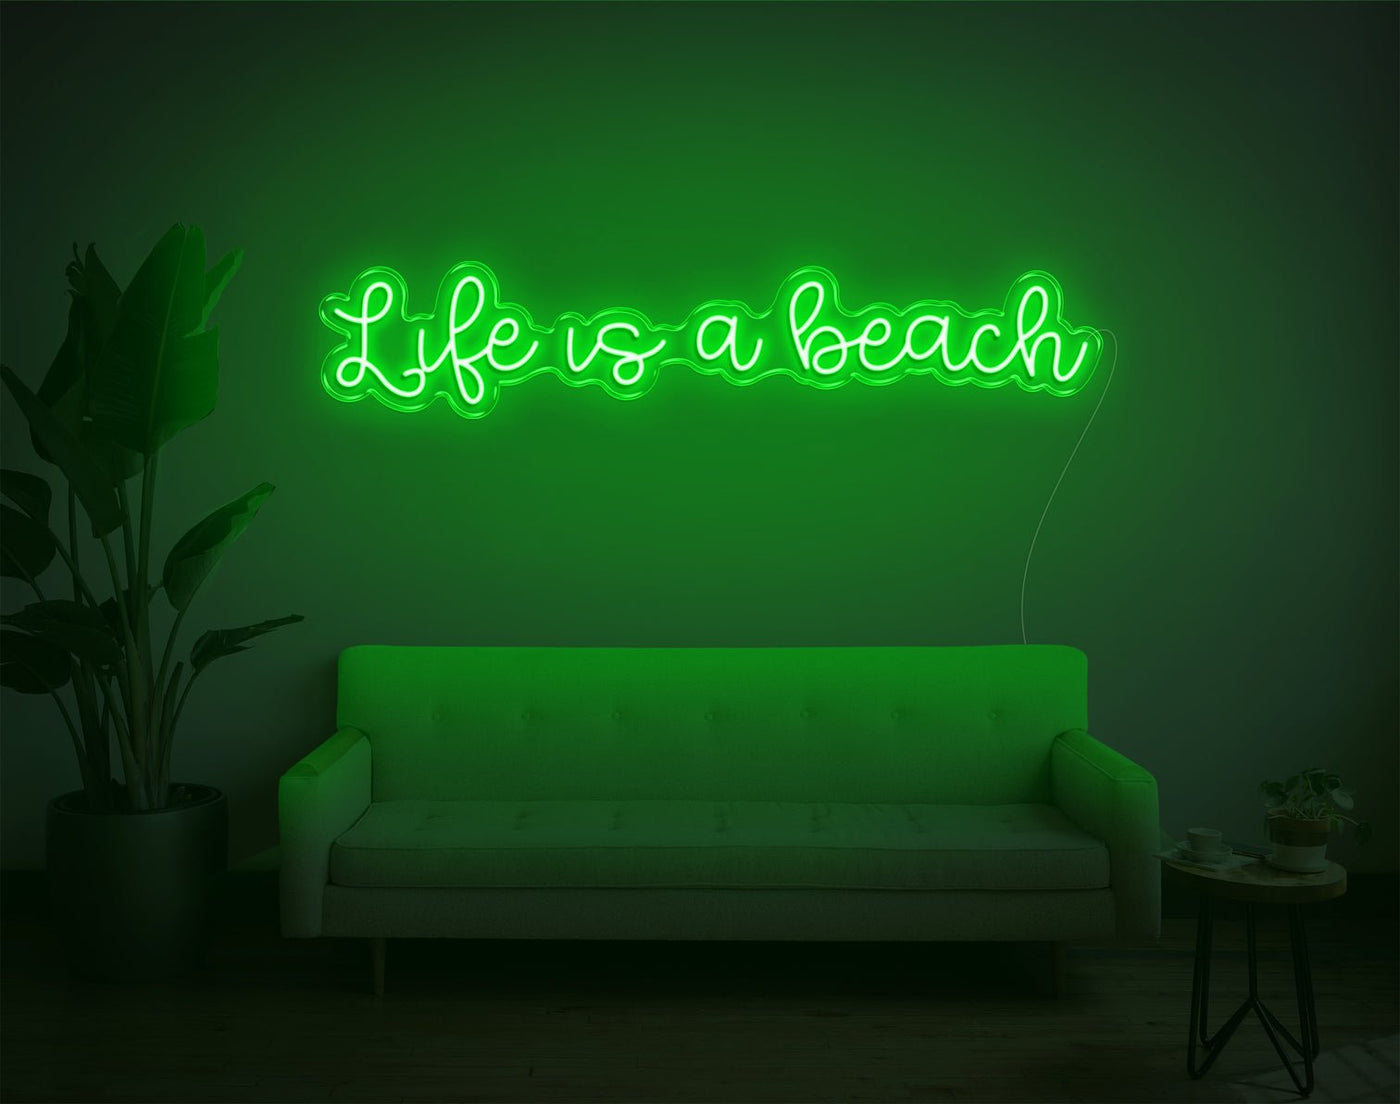 Life is a beach LED Neon Sign - 28inch x 7inchGreen